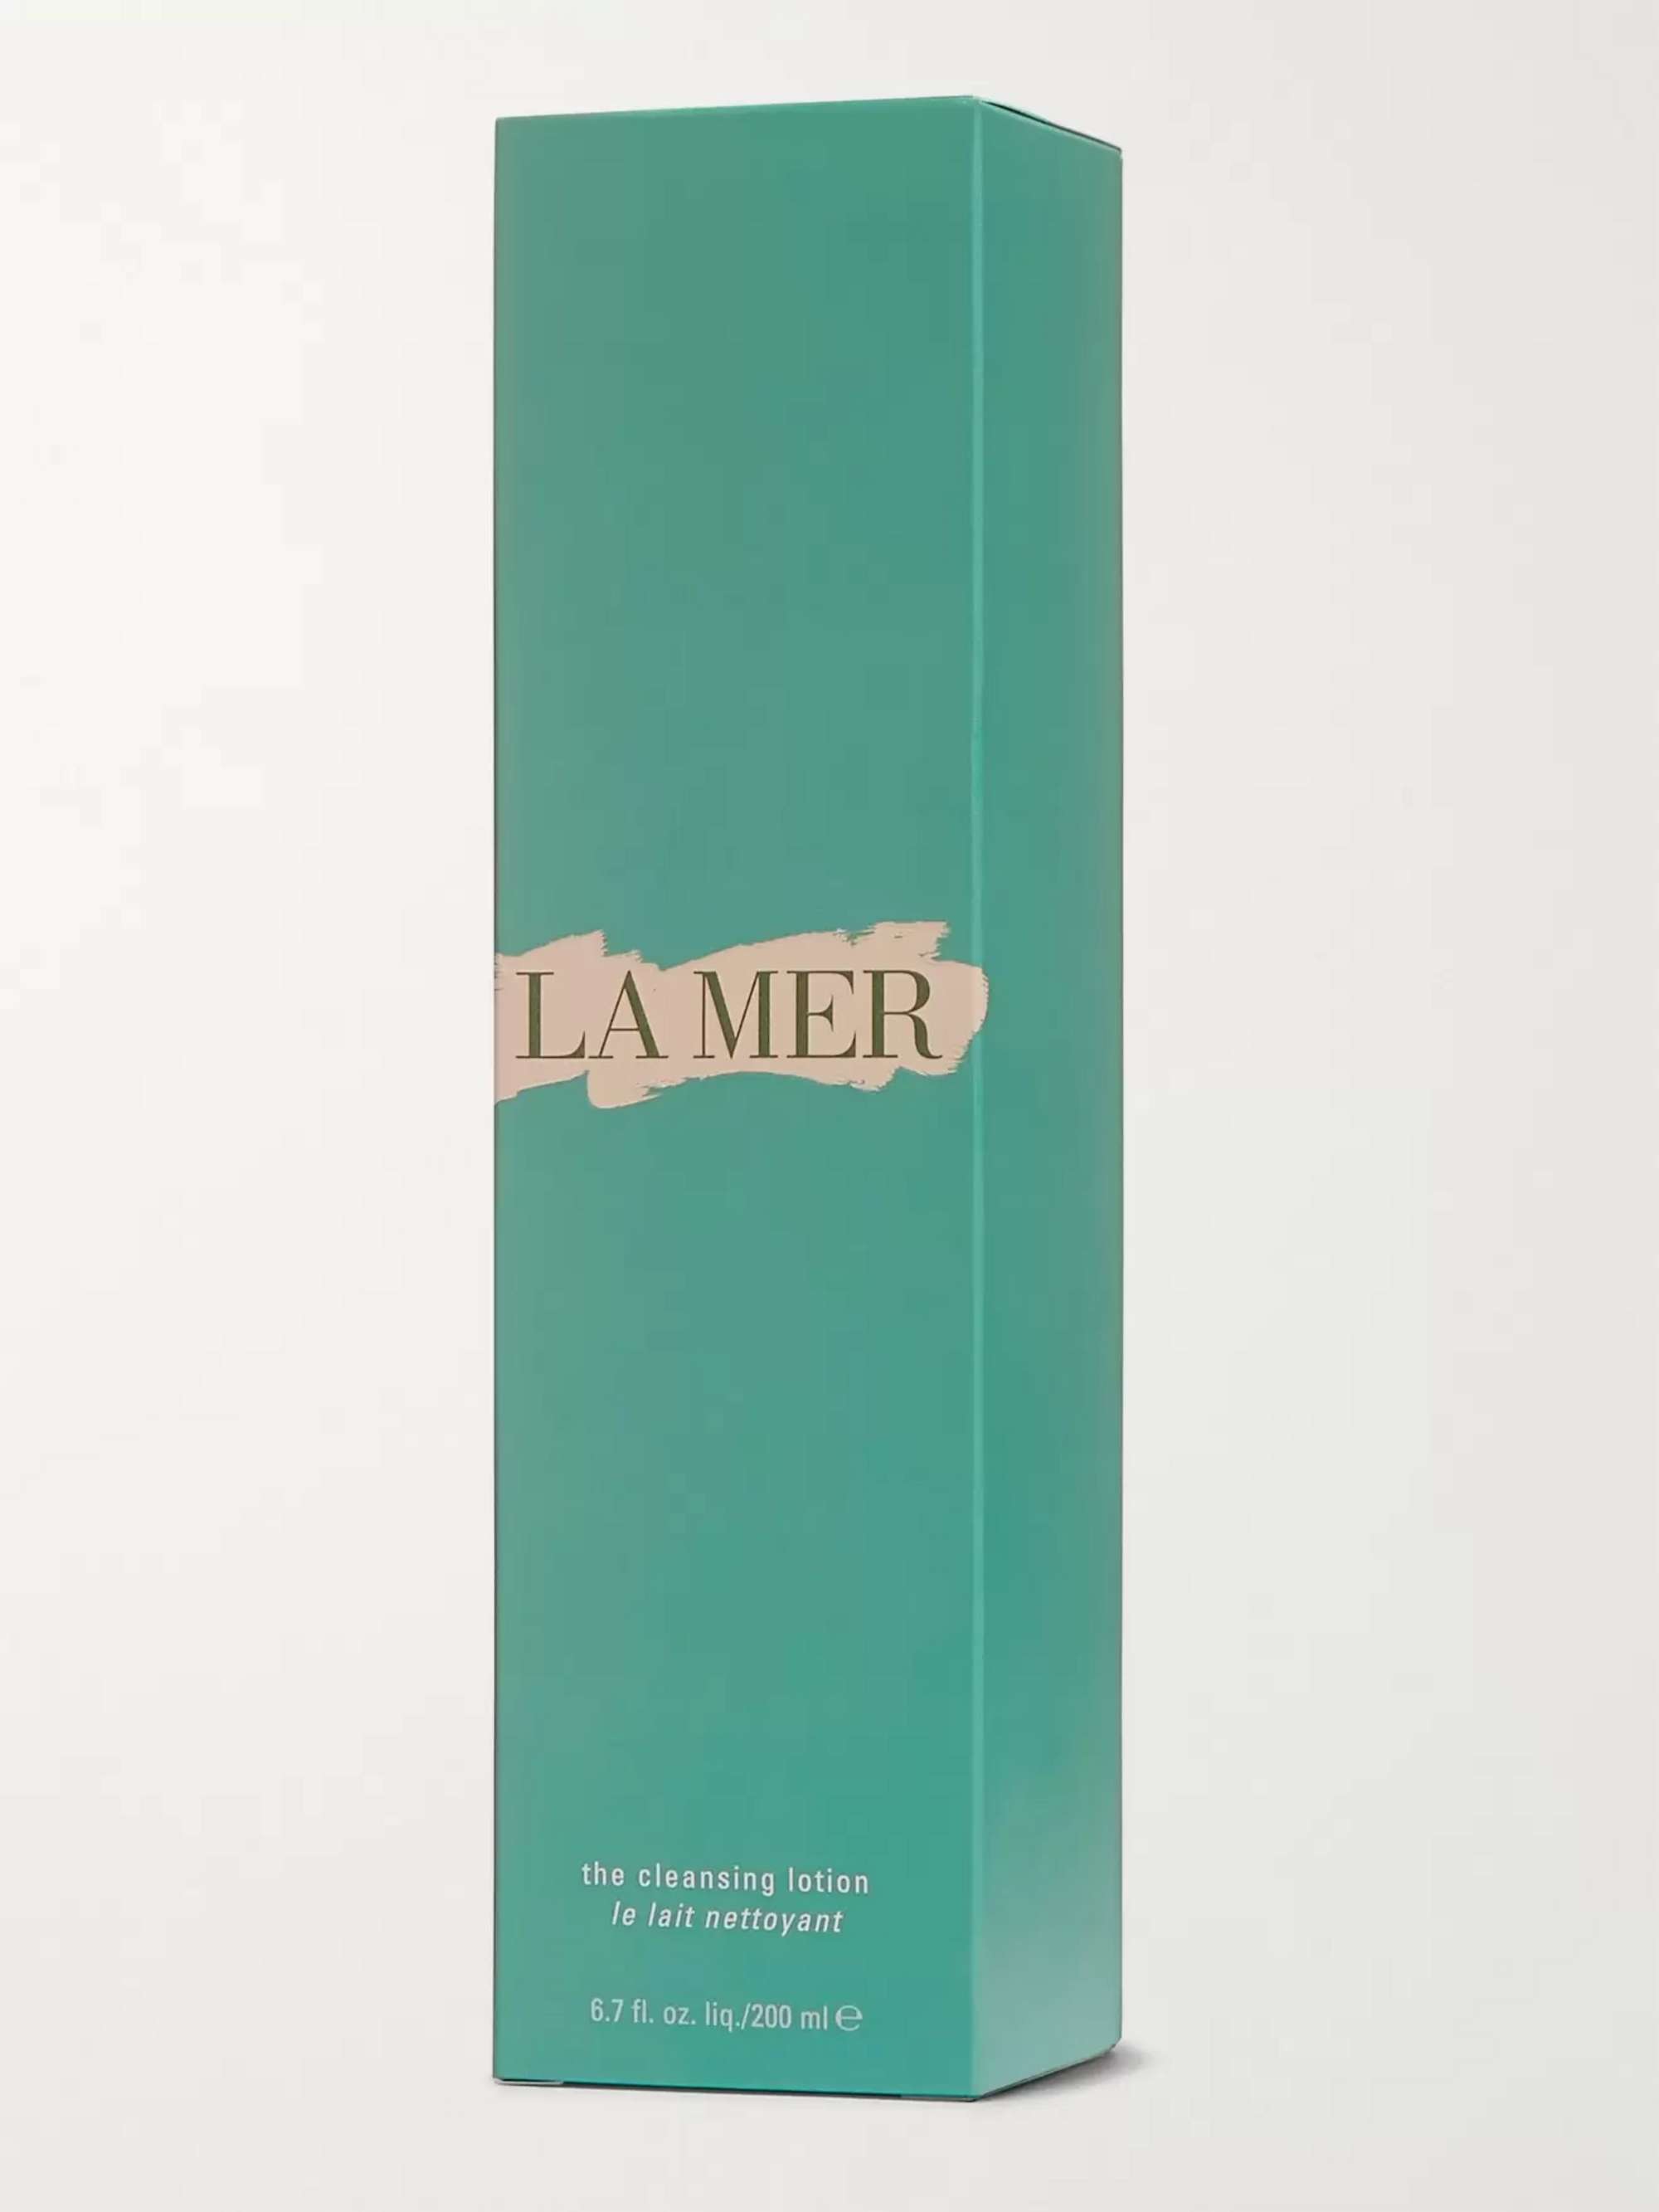 La Mer The Cleansing Lotion, 200ml